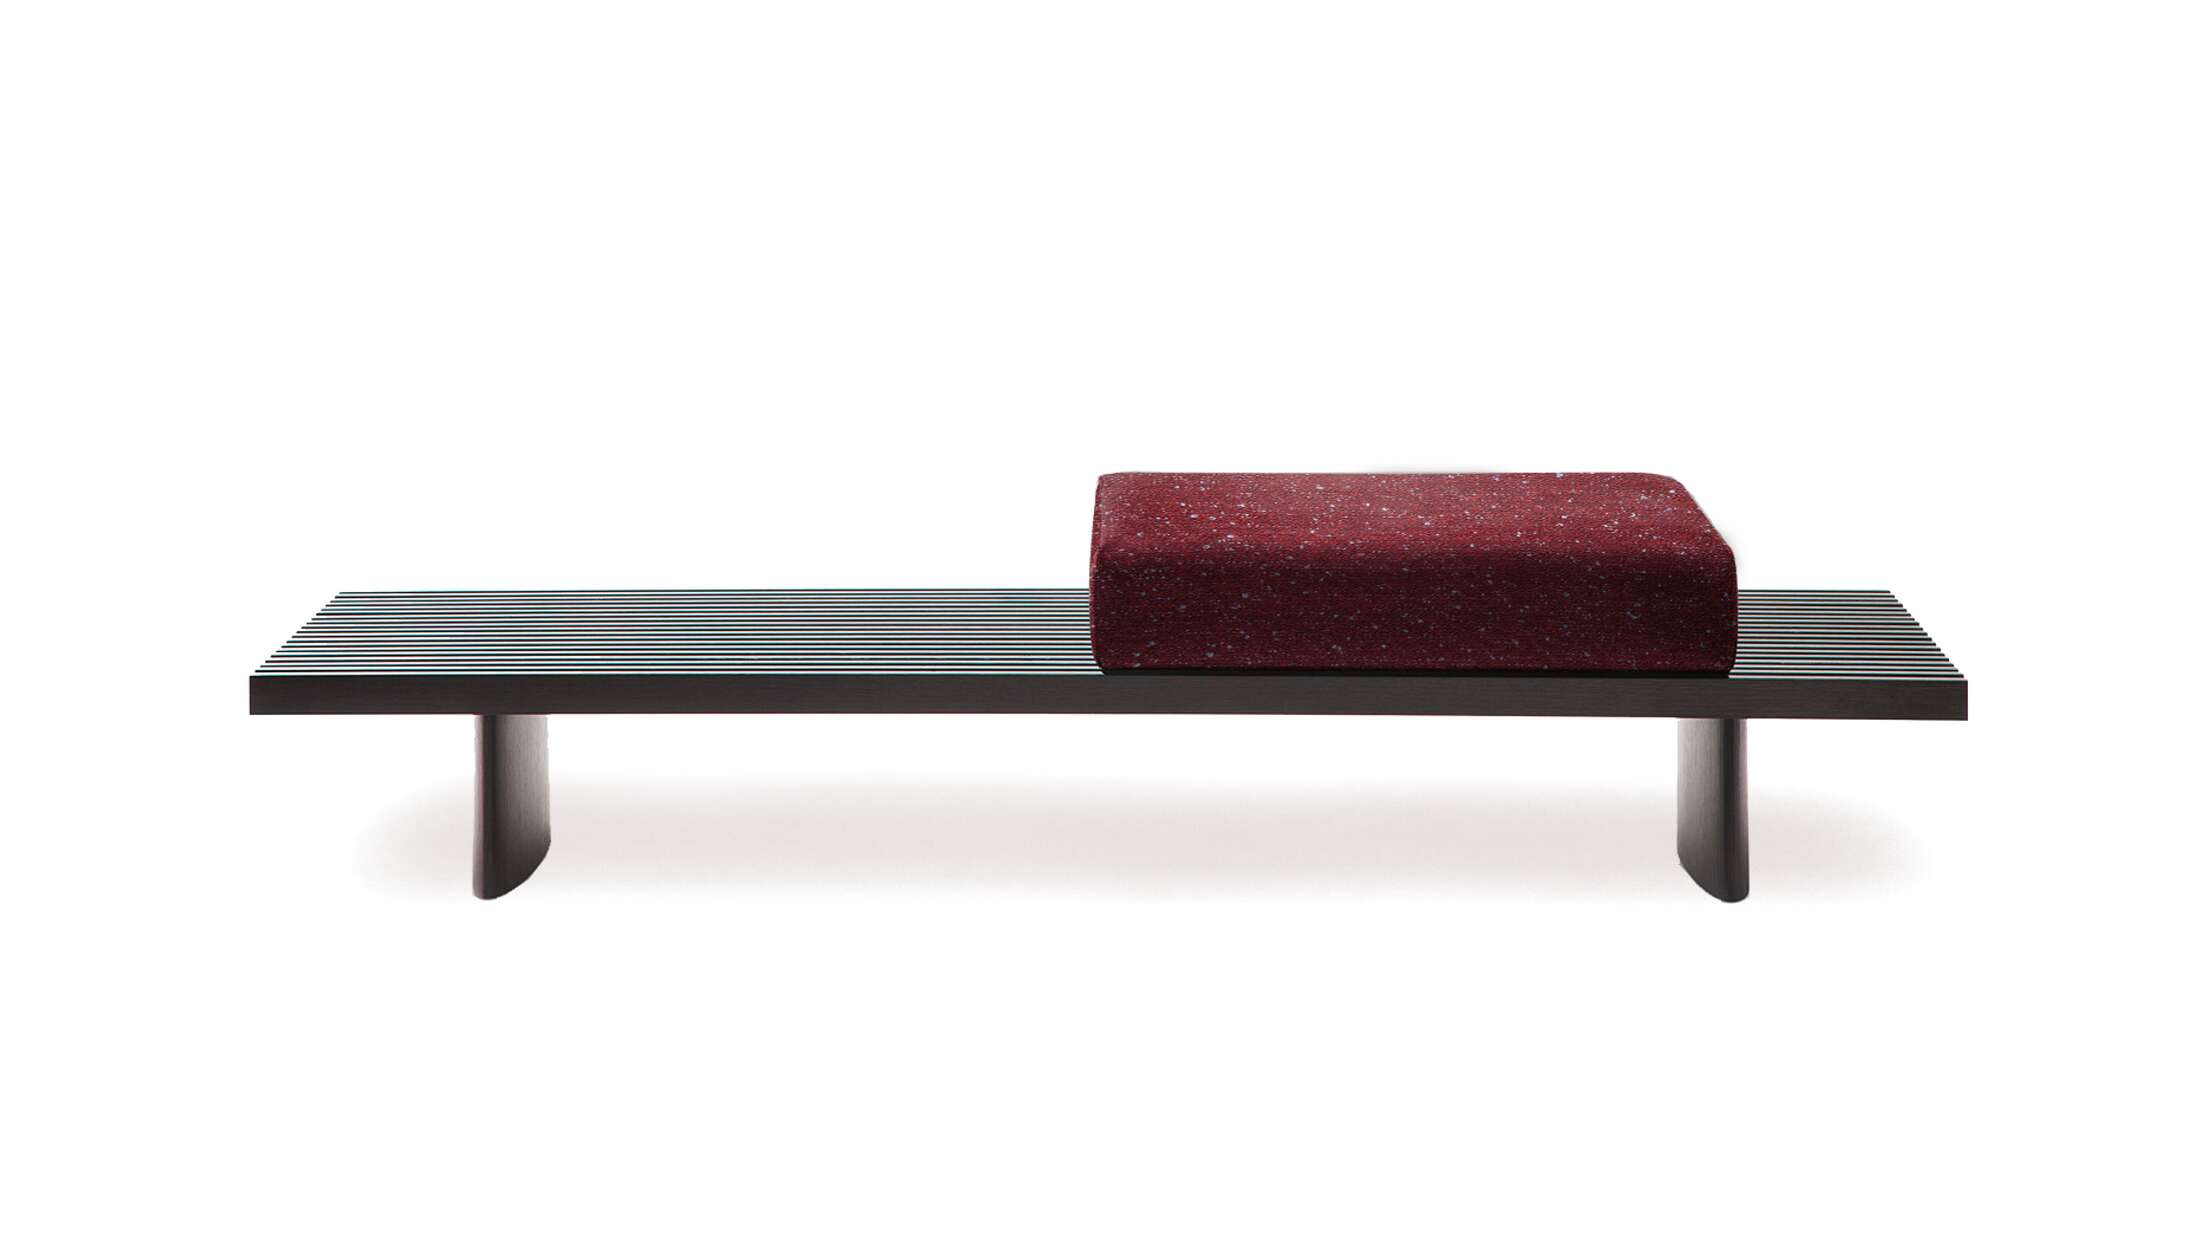 Prices vary dependent on the chosen material/color. Low table that can also be used as a sofa or bench designed by Charlotte Perriand in 1953. Relaunched by Cassina in 2004.  Manufactured by Cassina in Italy. Production lead time may currently vary